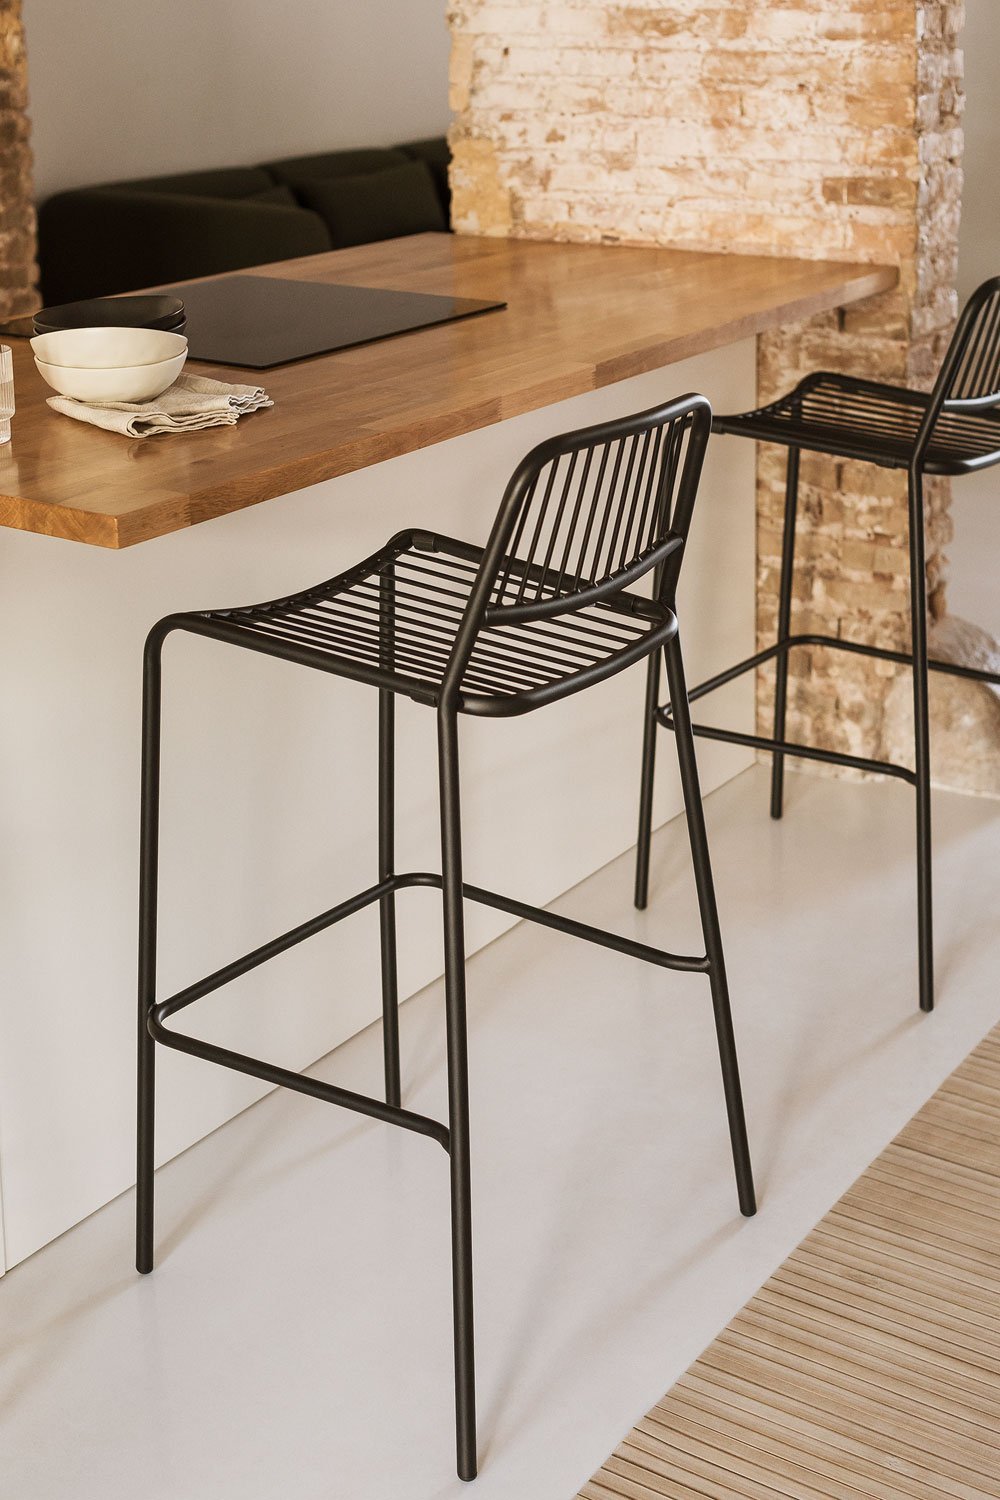 Stackable High Stool Elton, gallery image 1